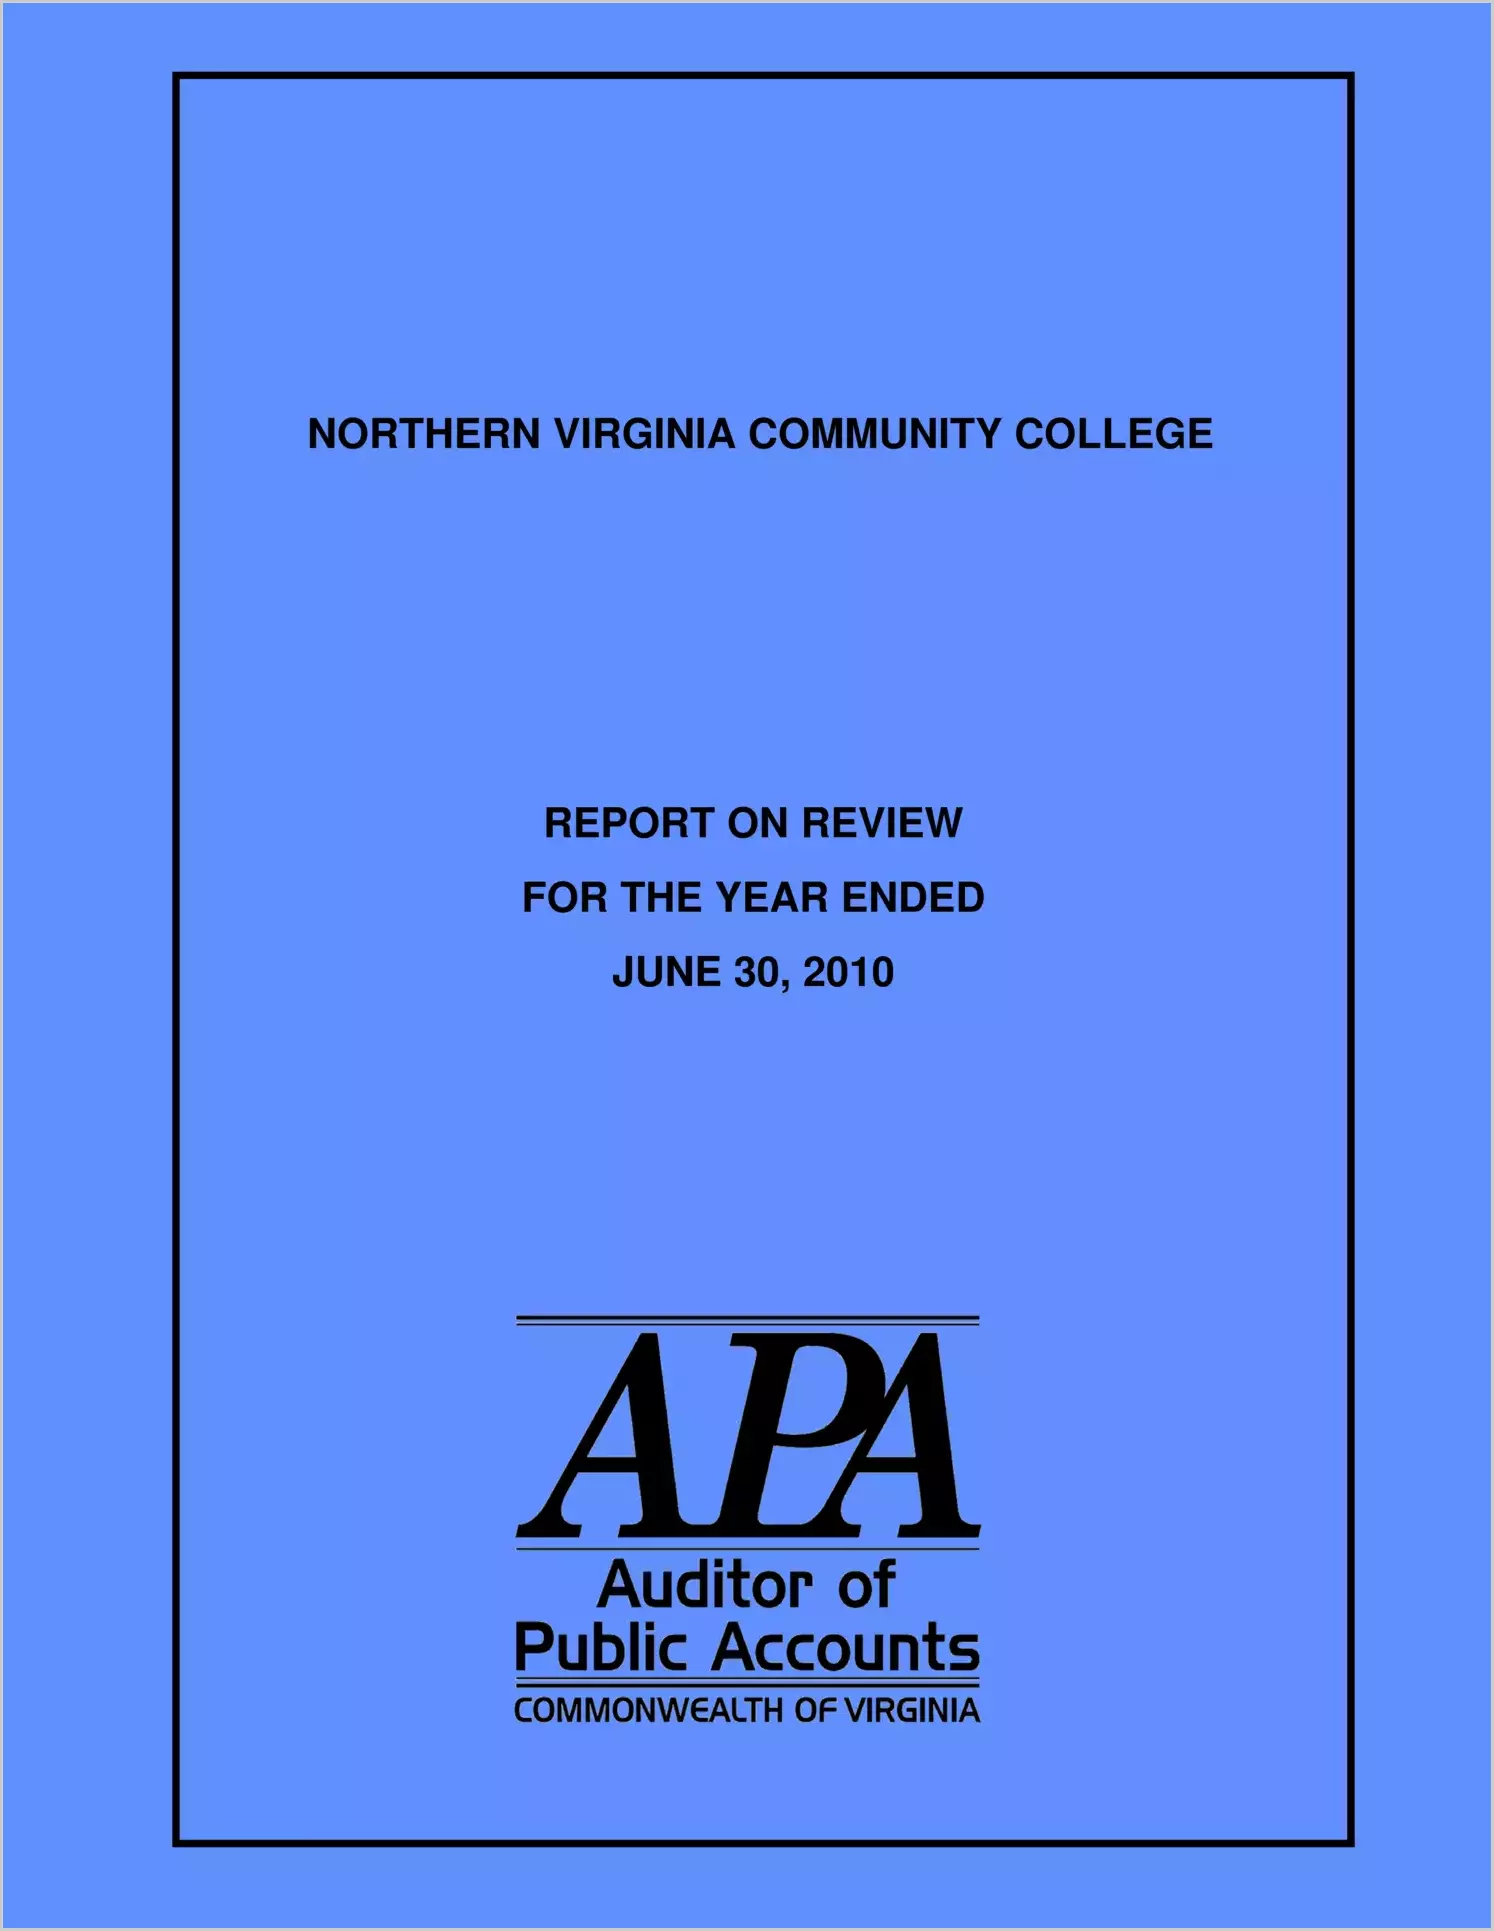 Northern Virginia Community College Report on Review for the fiscal year ended June 30, 2010